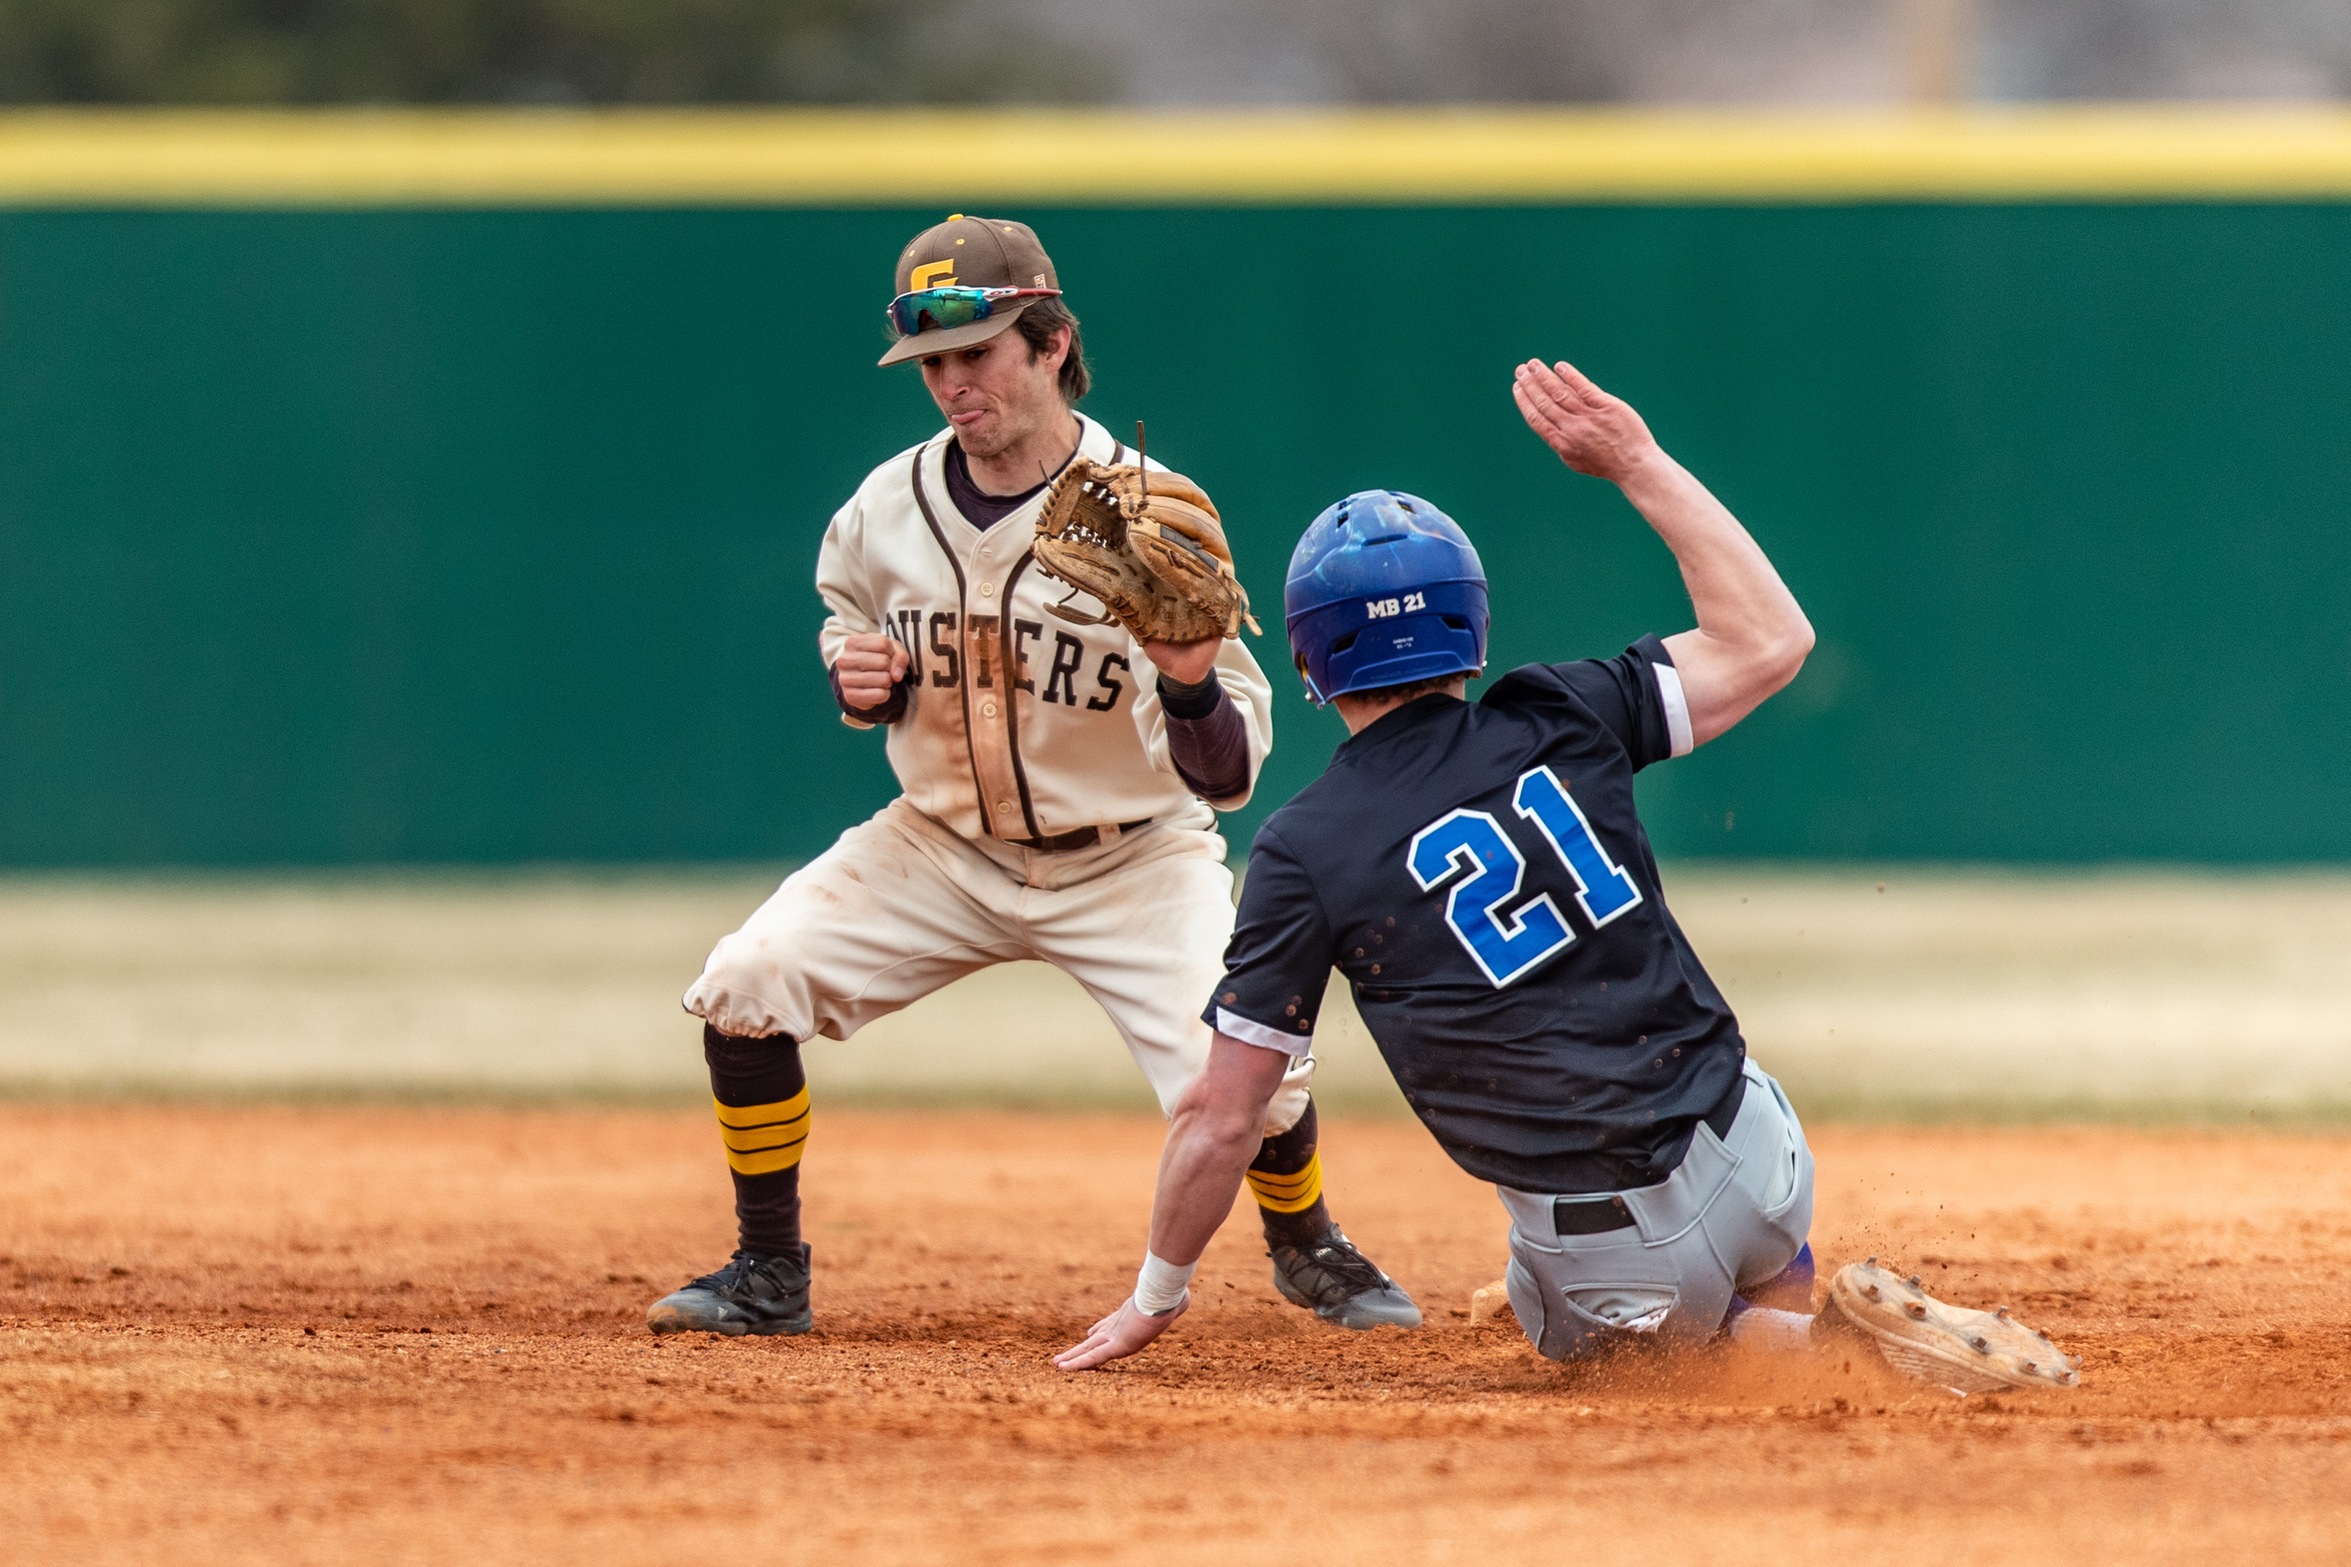 Miscues cost Broncbusters in game one vs. Pratt